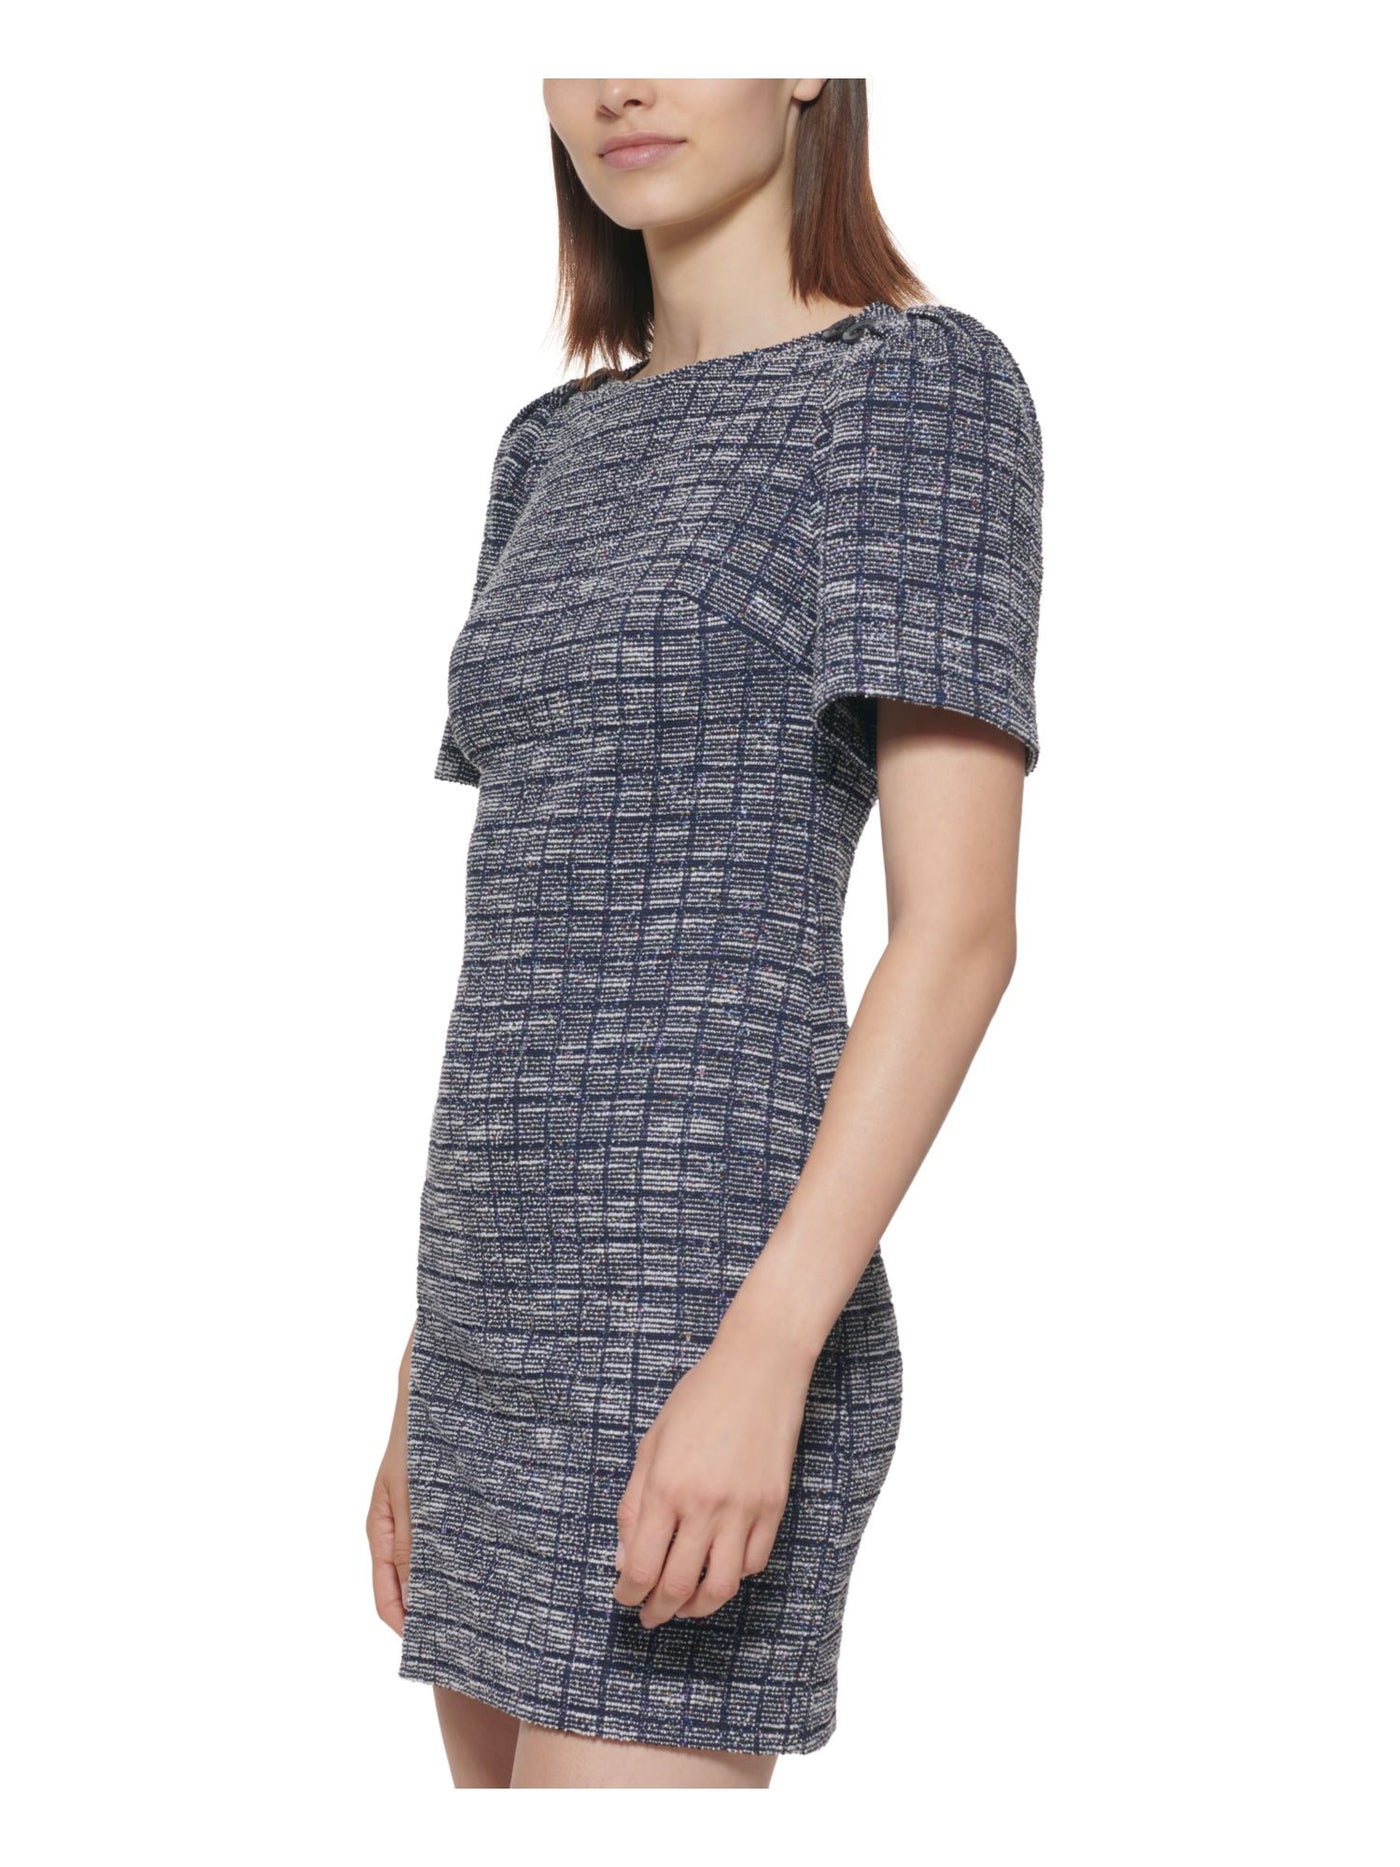 CALVIN KLEIN Womens Zippered Unlined Tweed Short Sleeve Round Neck Above The Knee Party Sheath Dress